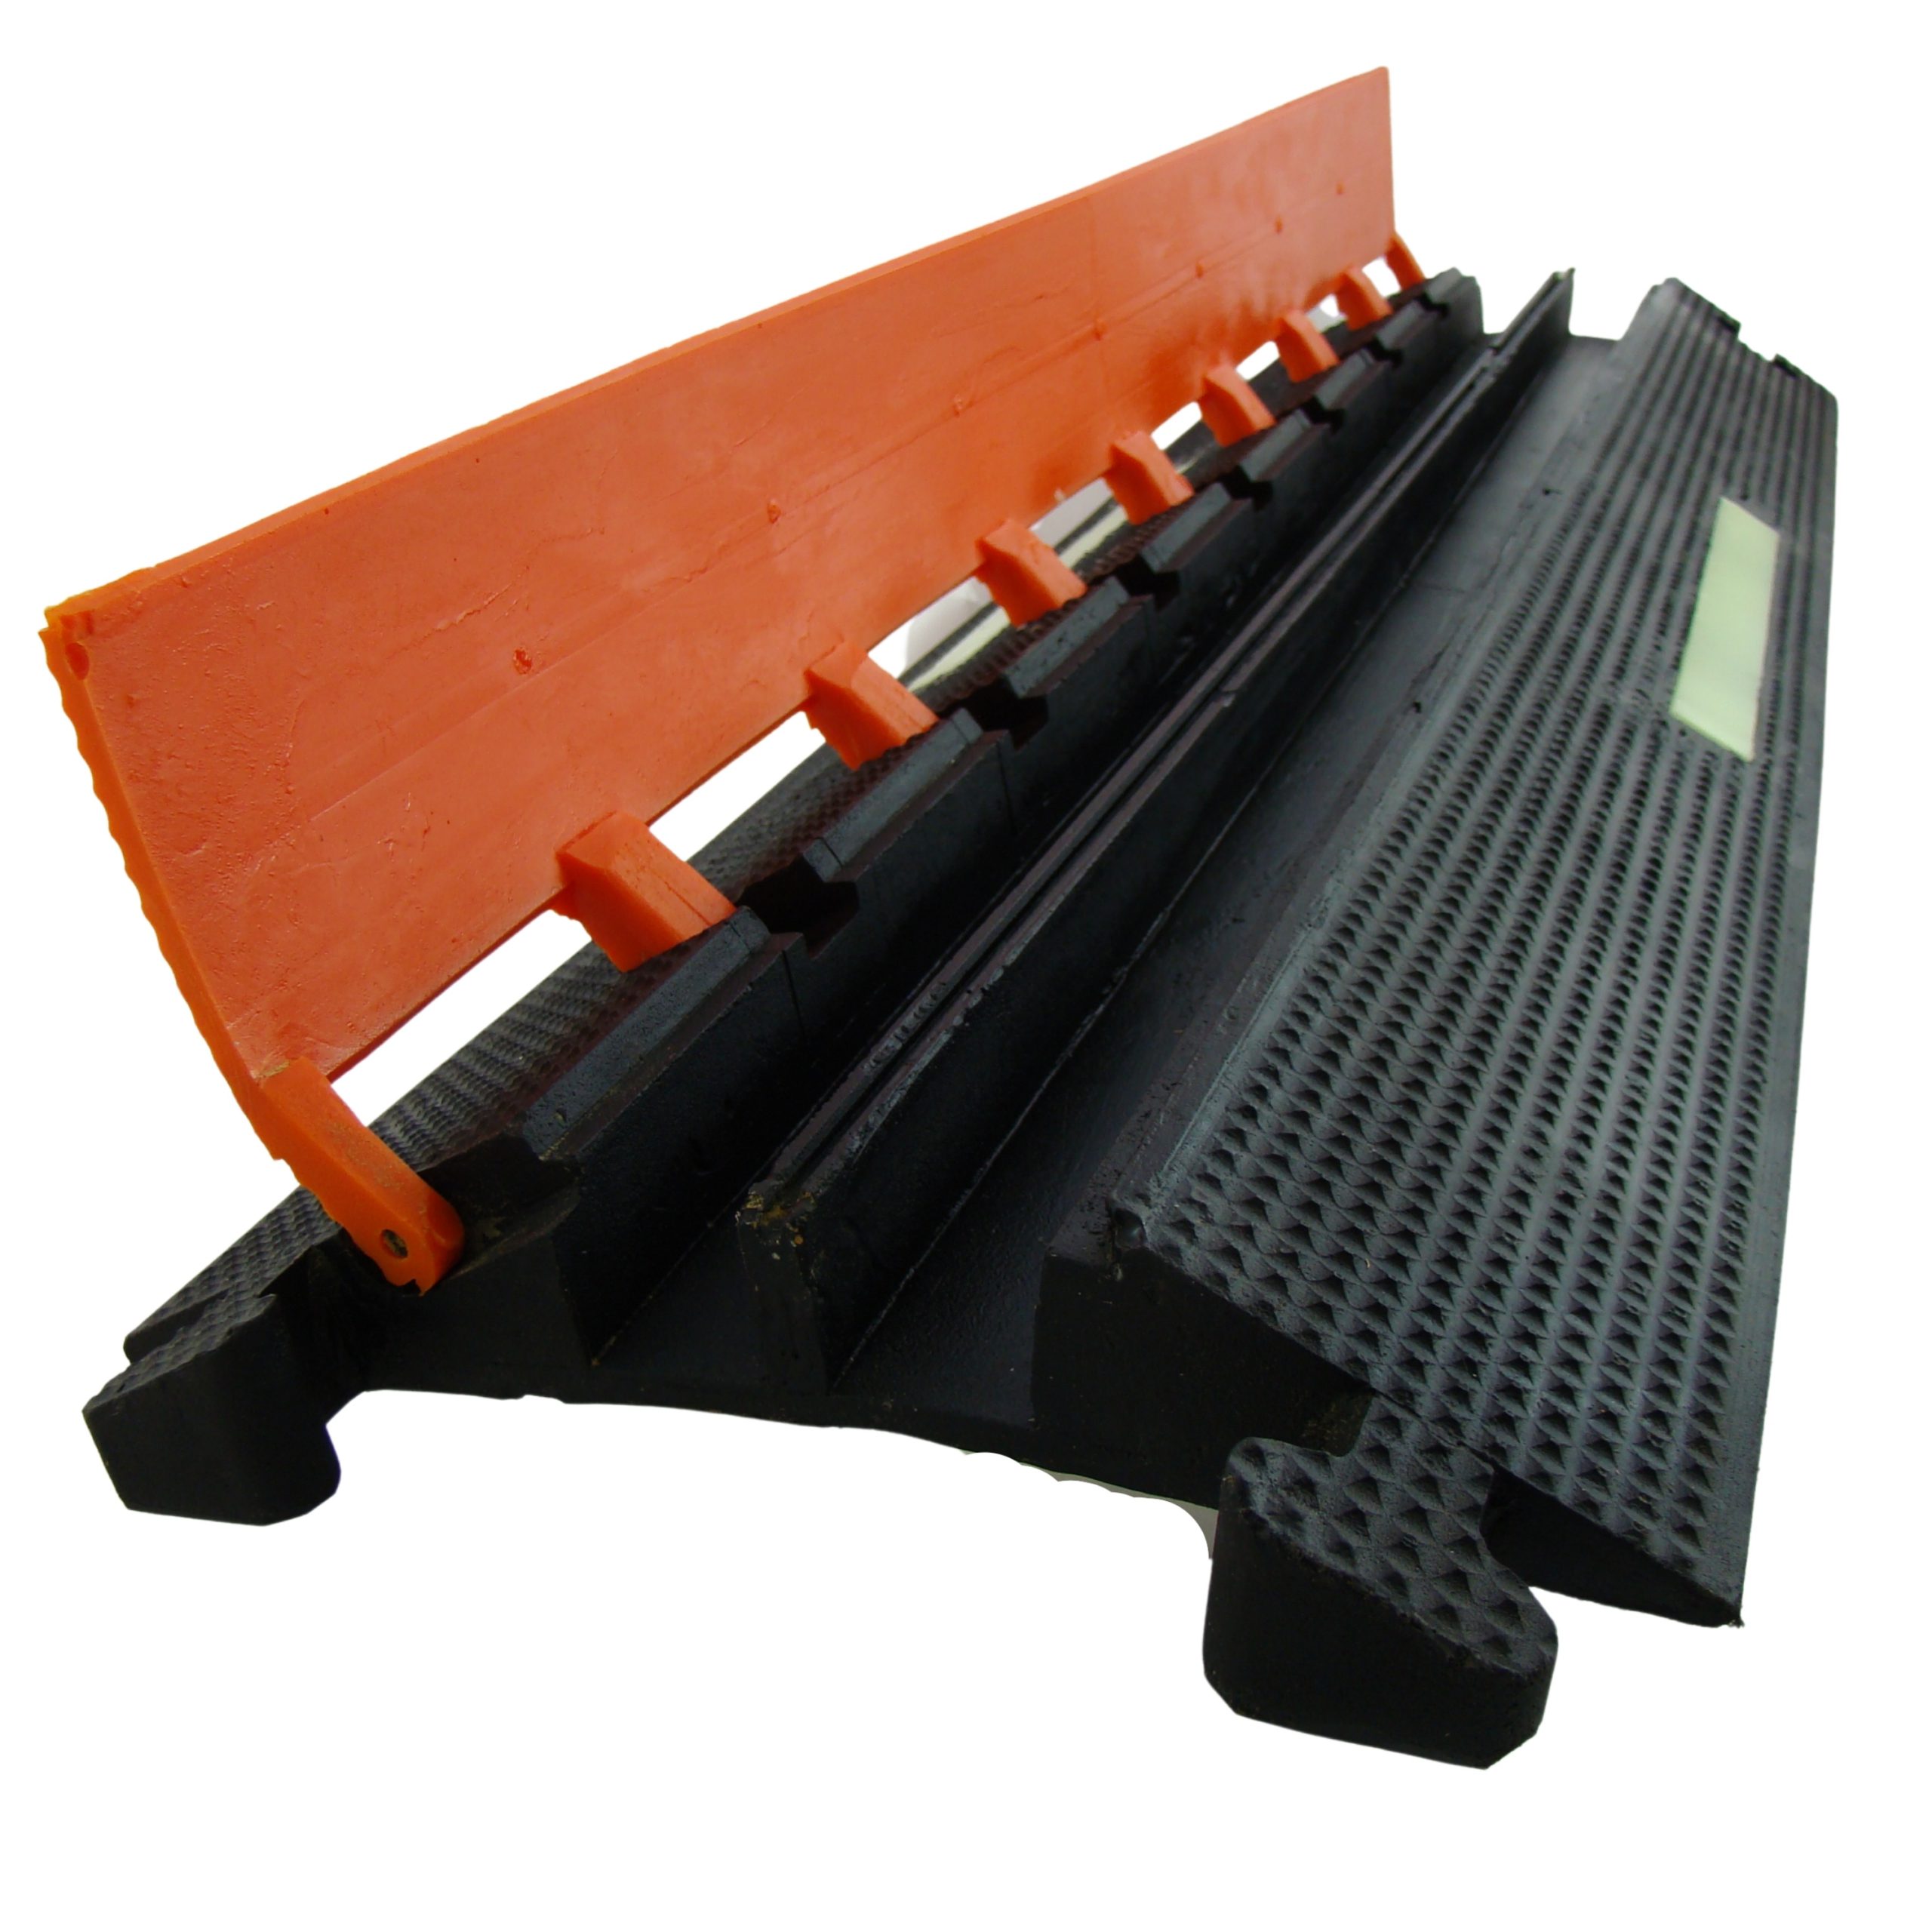 Cable Ramps & Protectors